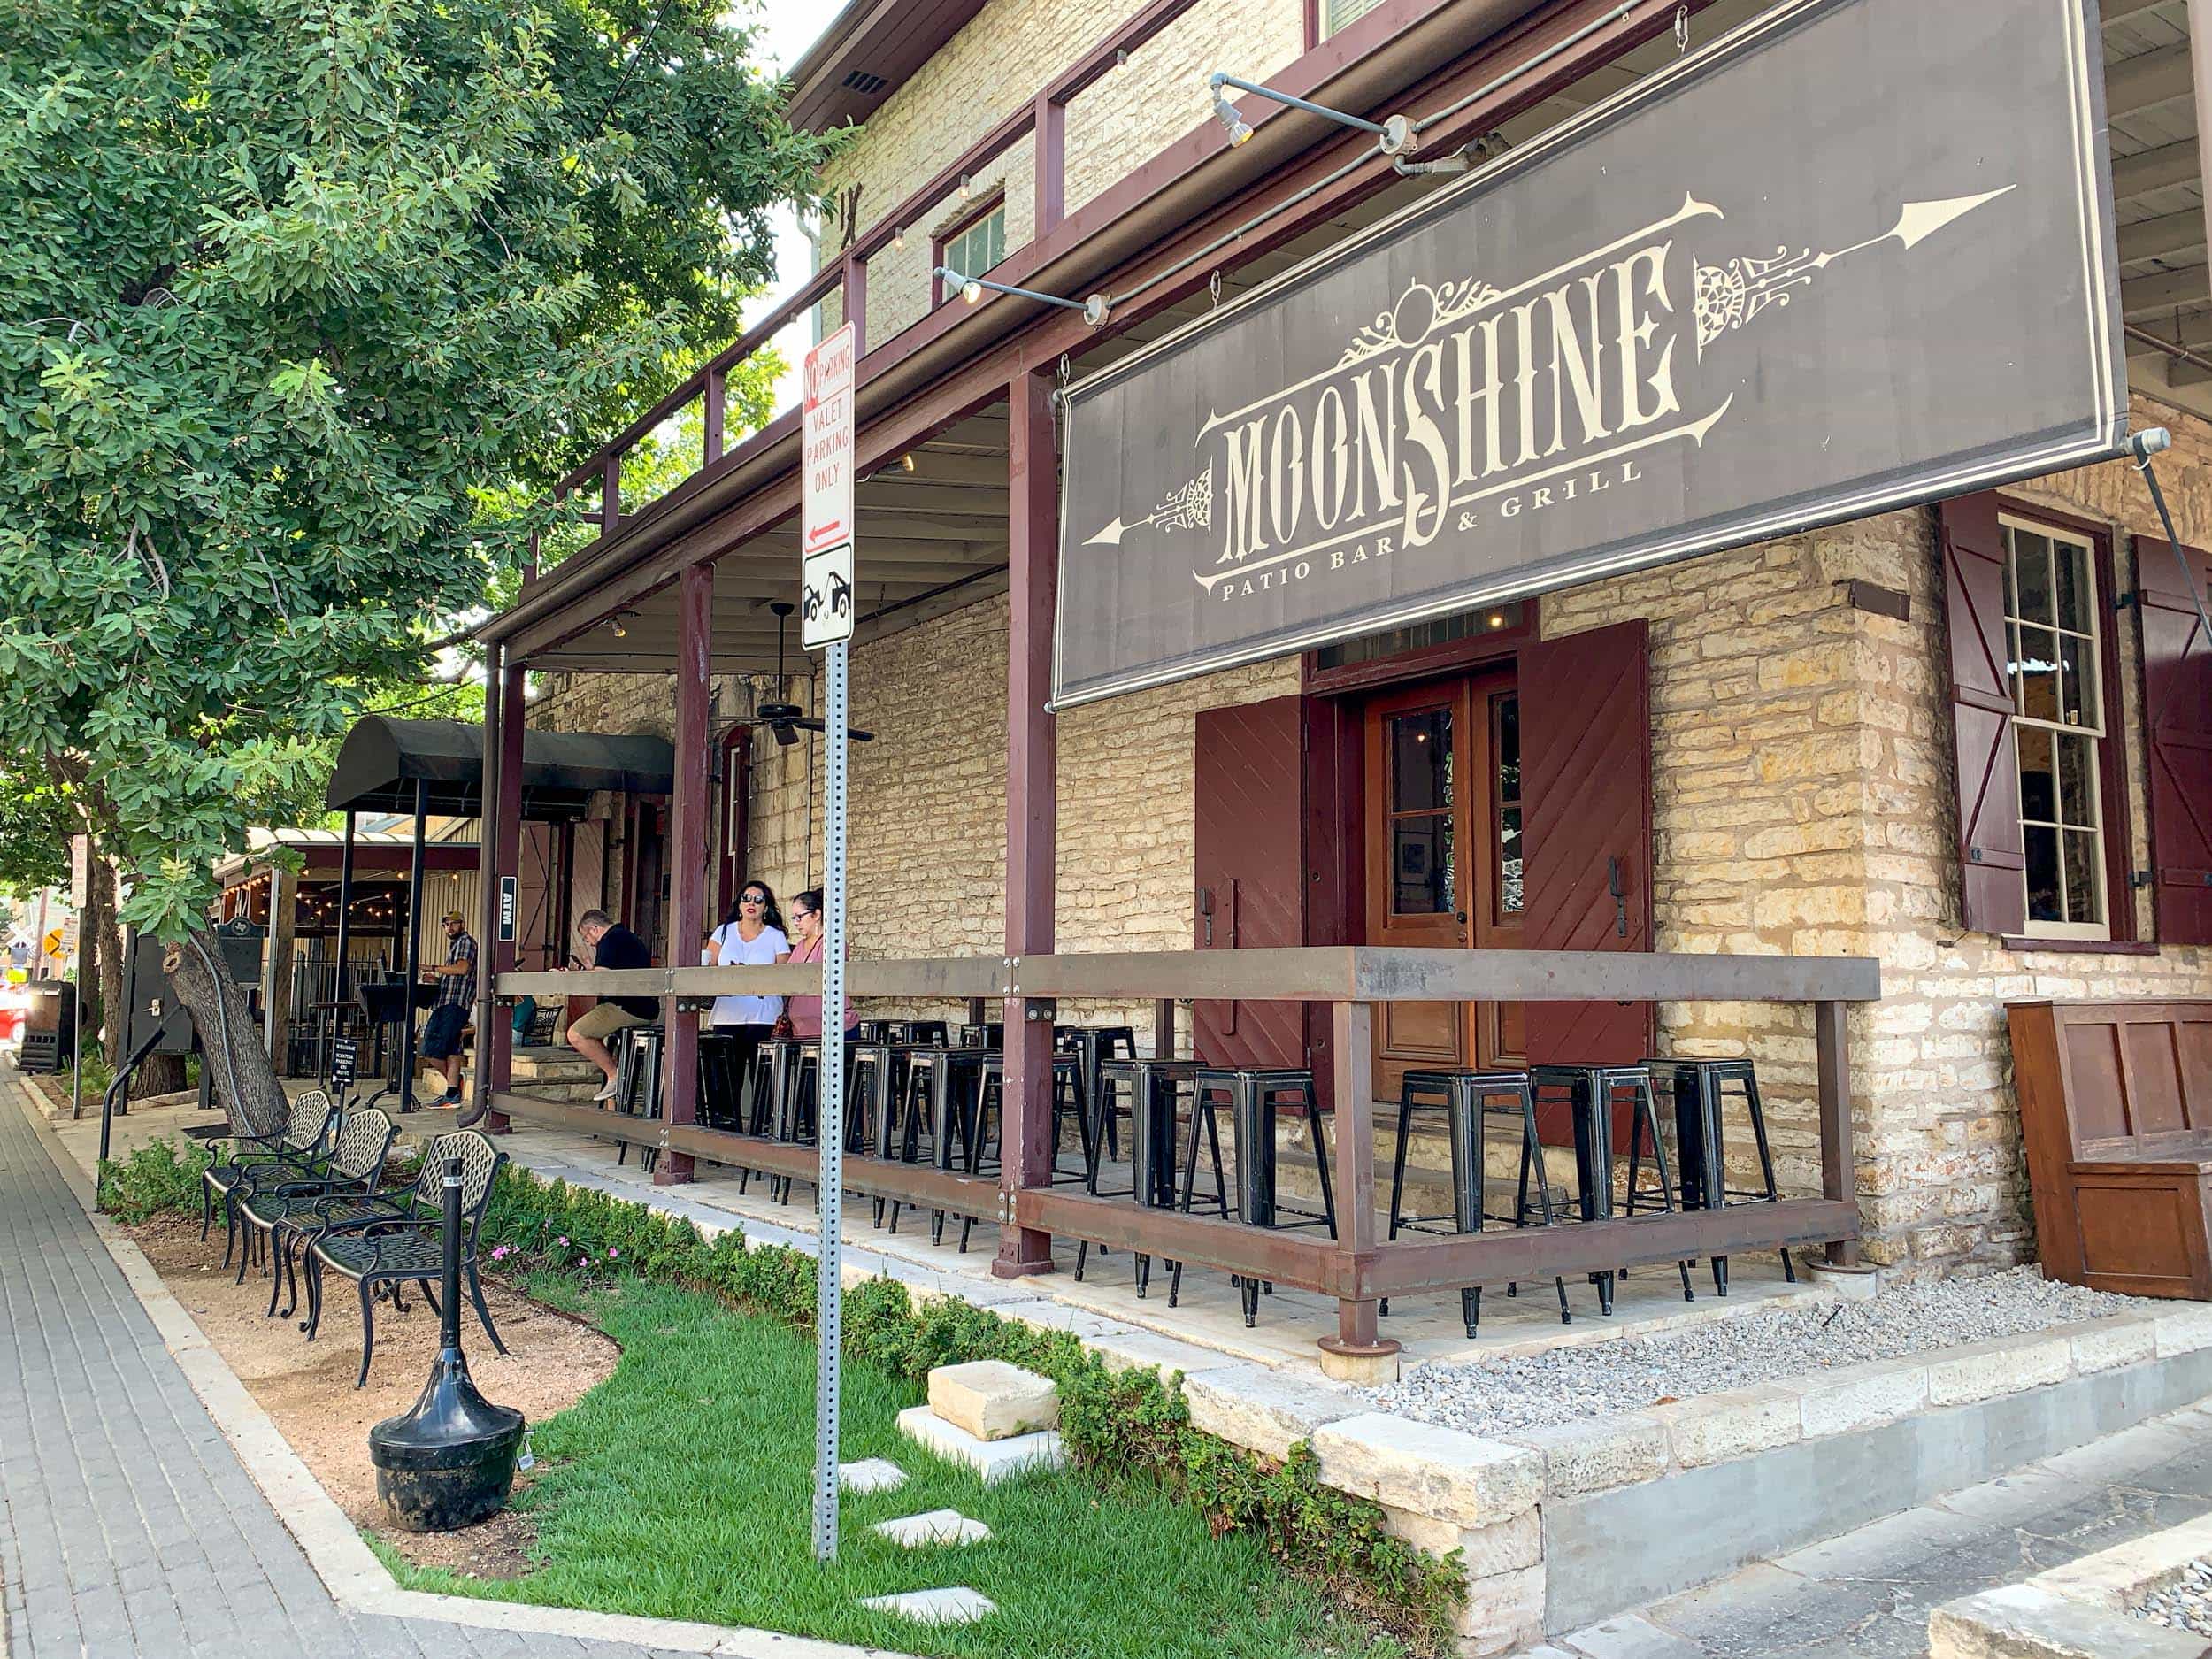 Moonshine Patio Bar and Grill in downtown Austin, TX.